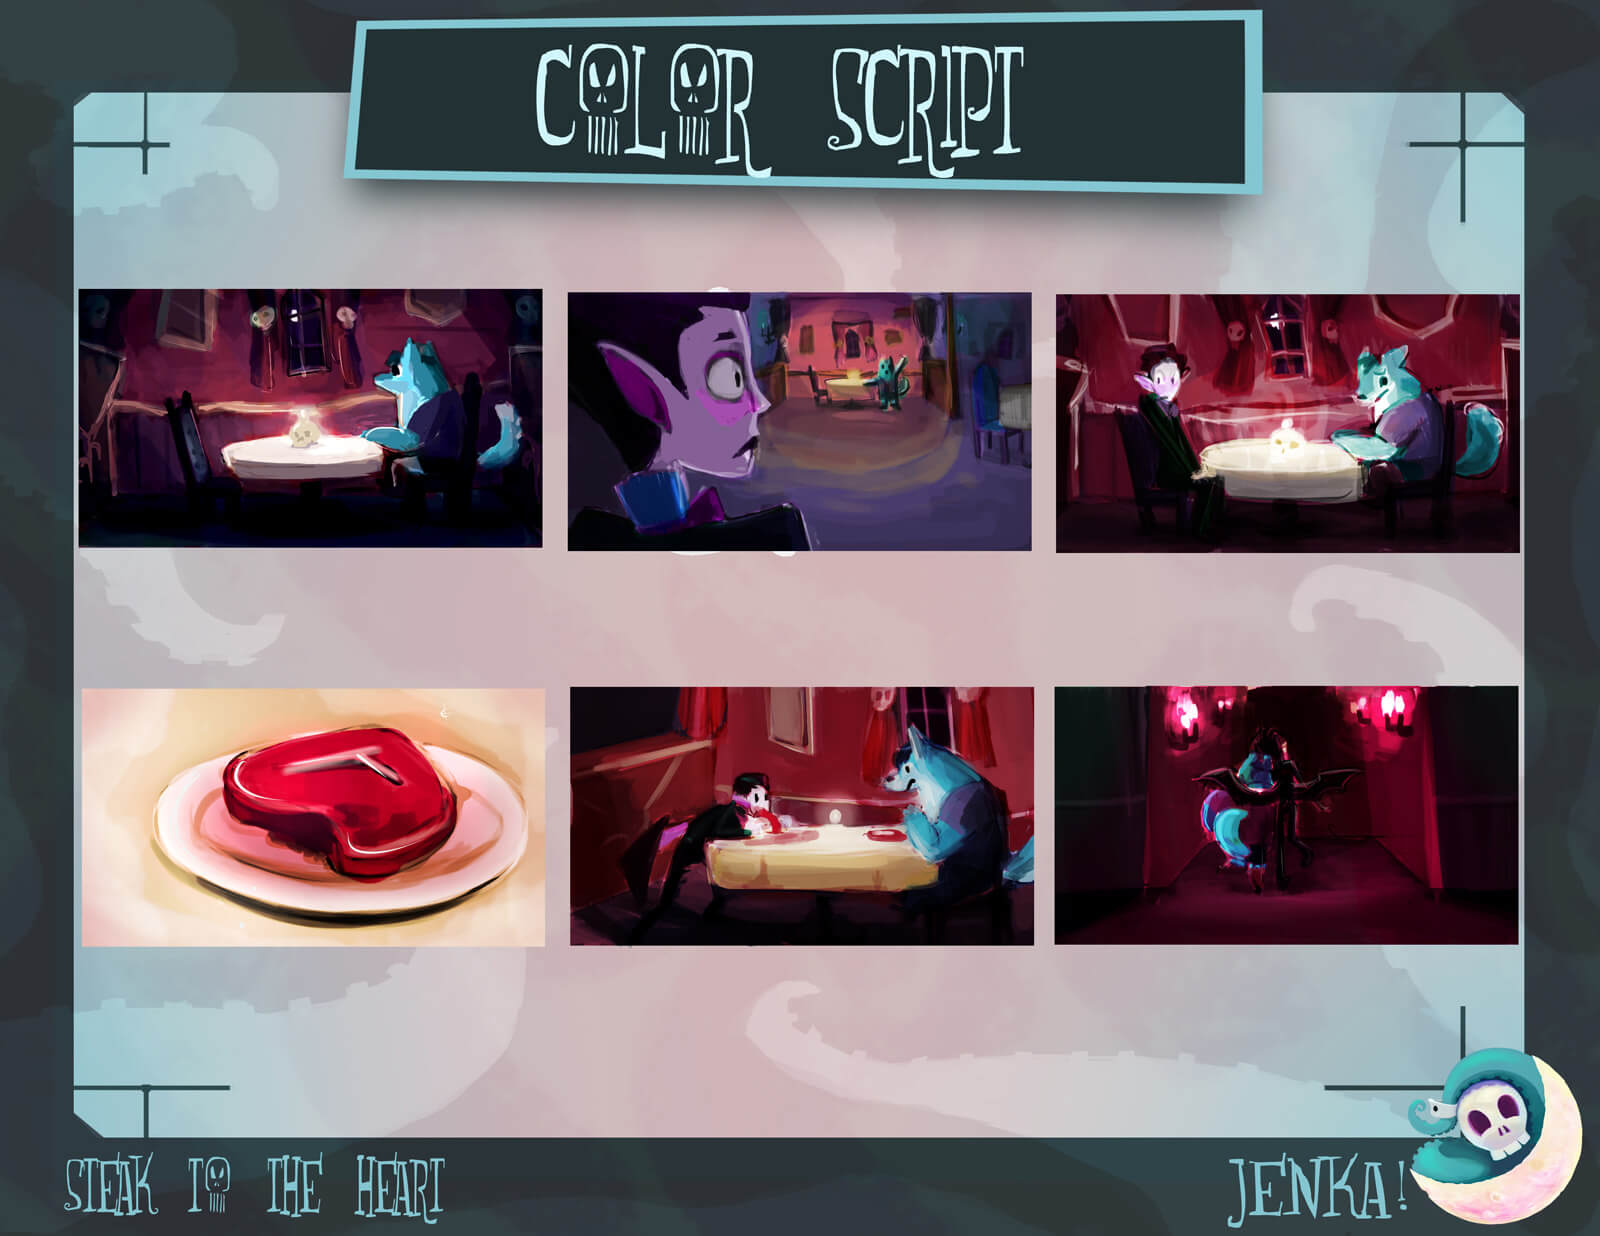 Color Script for the film Steak to the Heart, depicting the story in 6 frames, from beginning to end